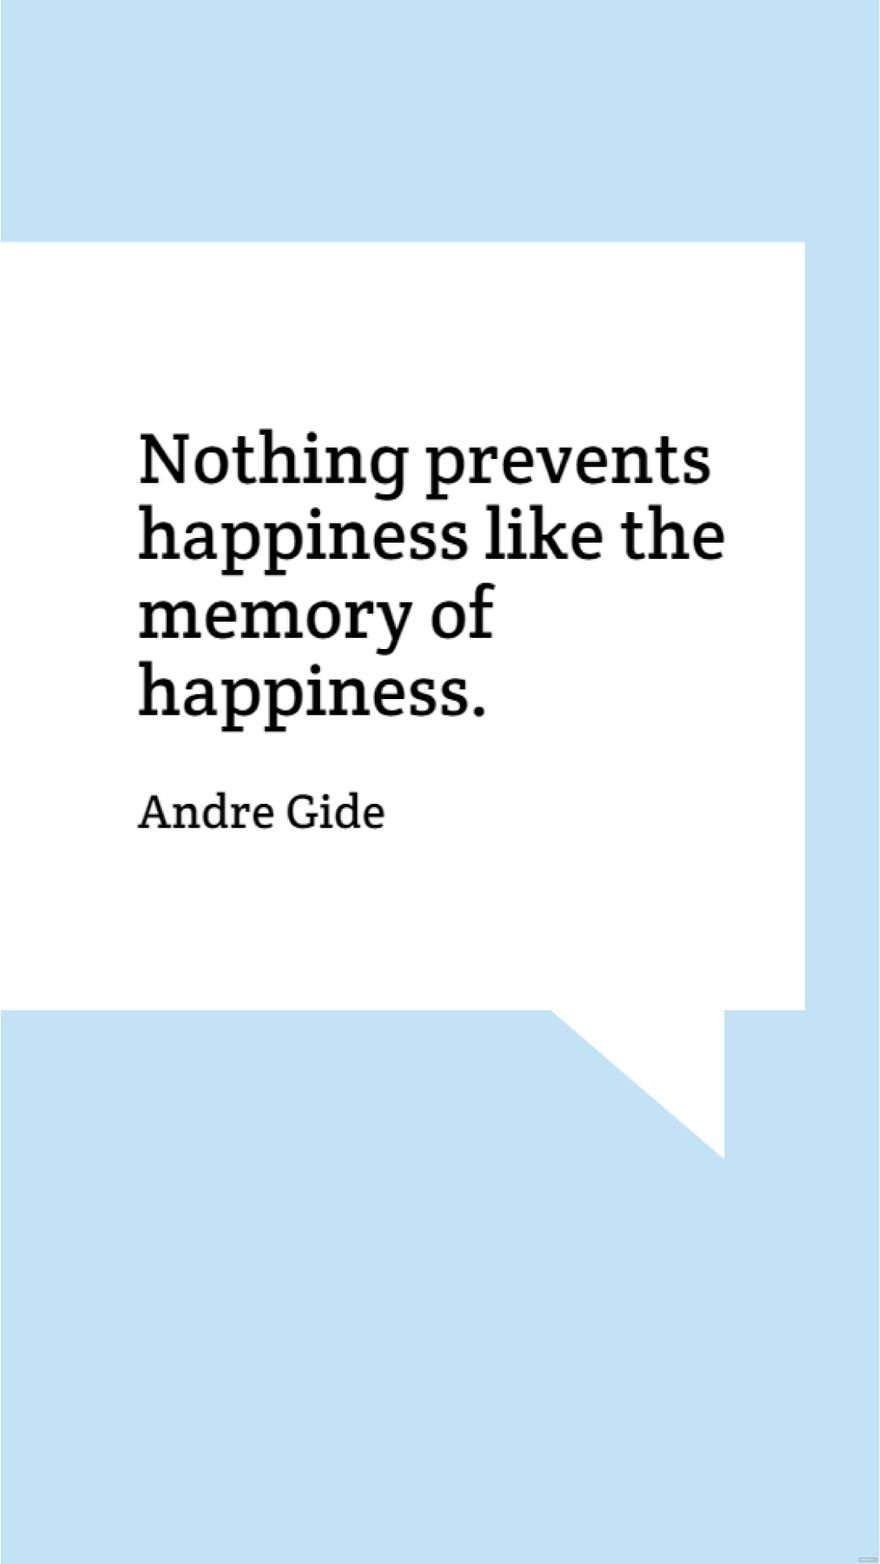 Andre Gide - Nothing prevents happiness like the memory of happiness.